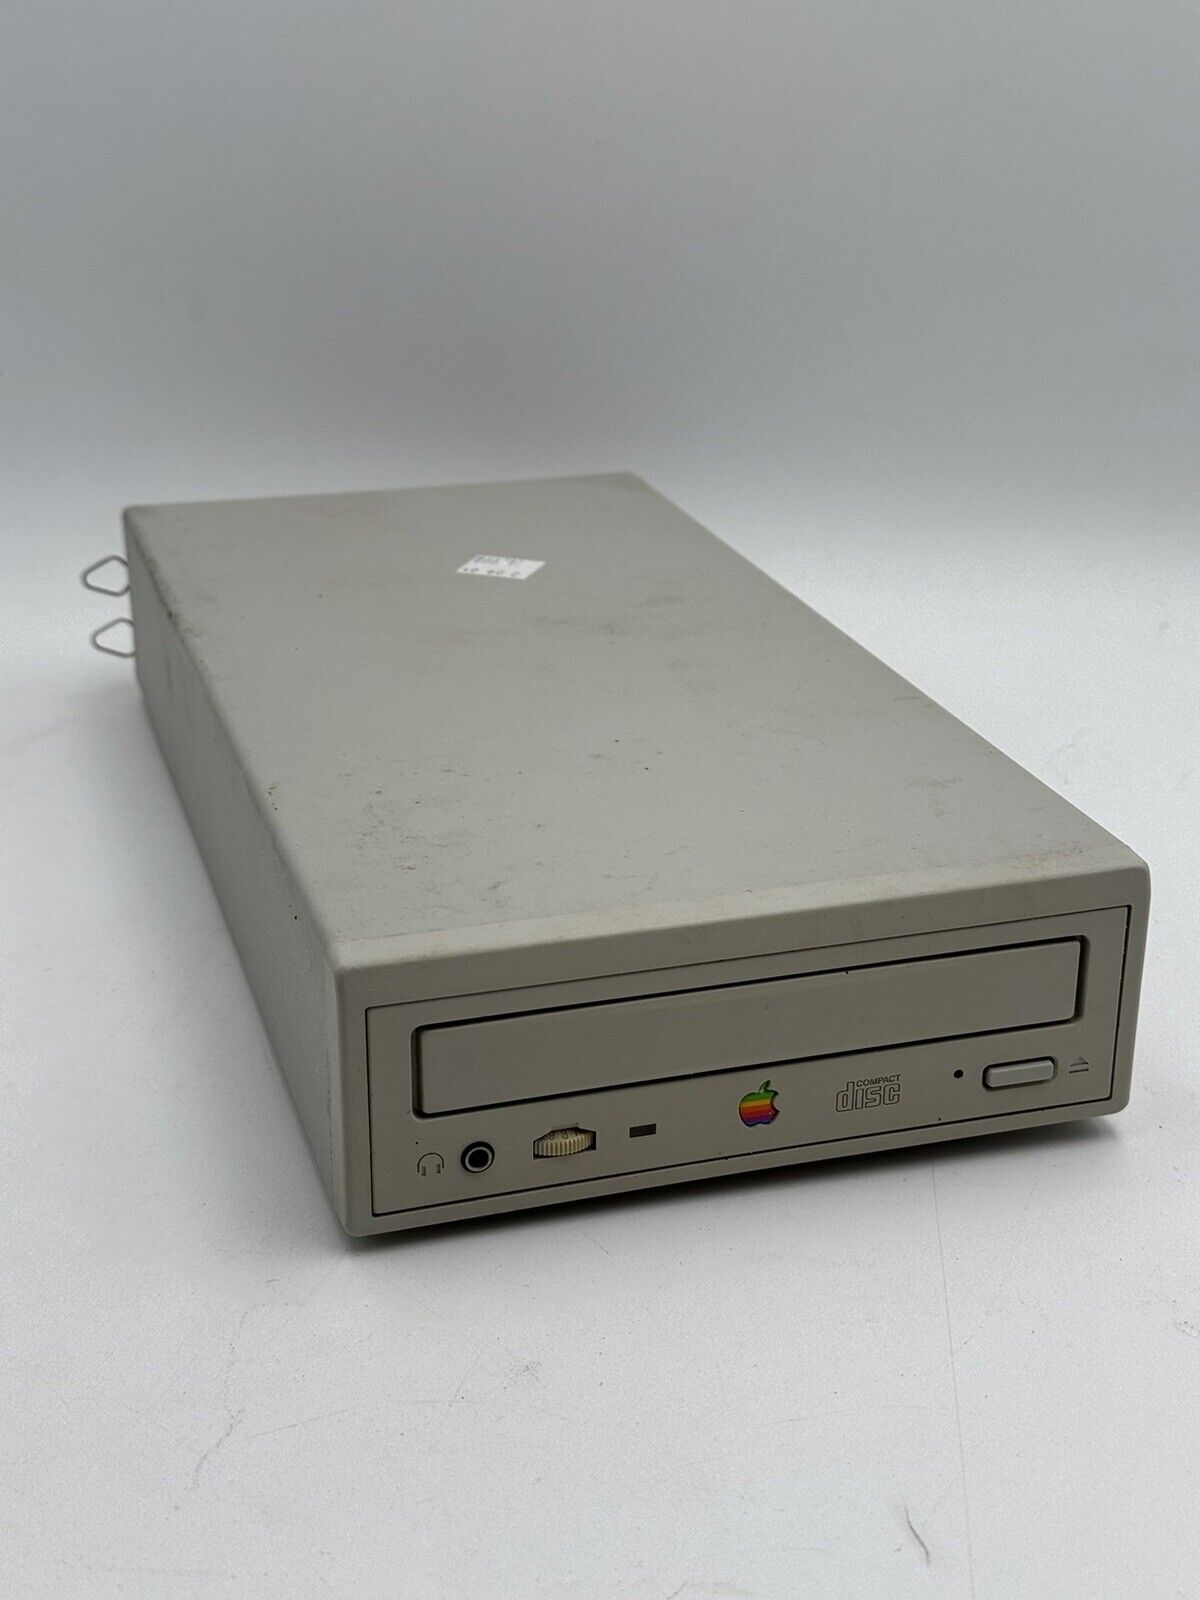 Vintage AppleCD 300e Plus SCSI CD-ROM drive Model M2918 - Tested and Working